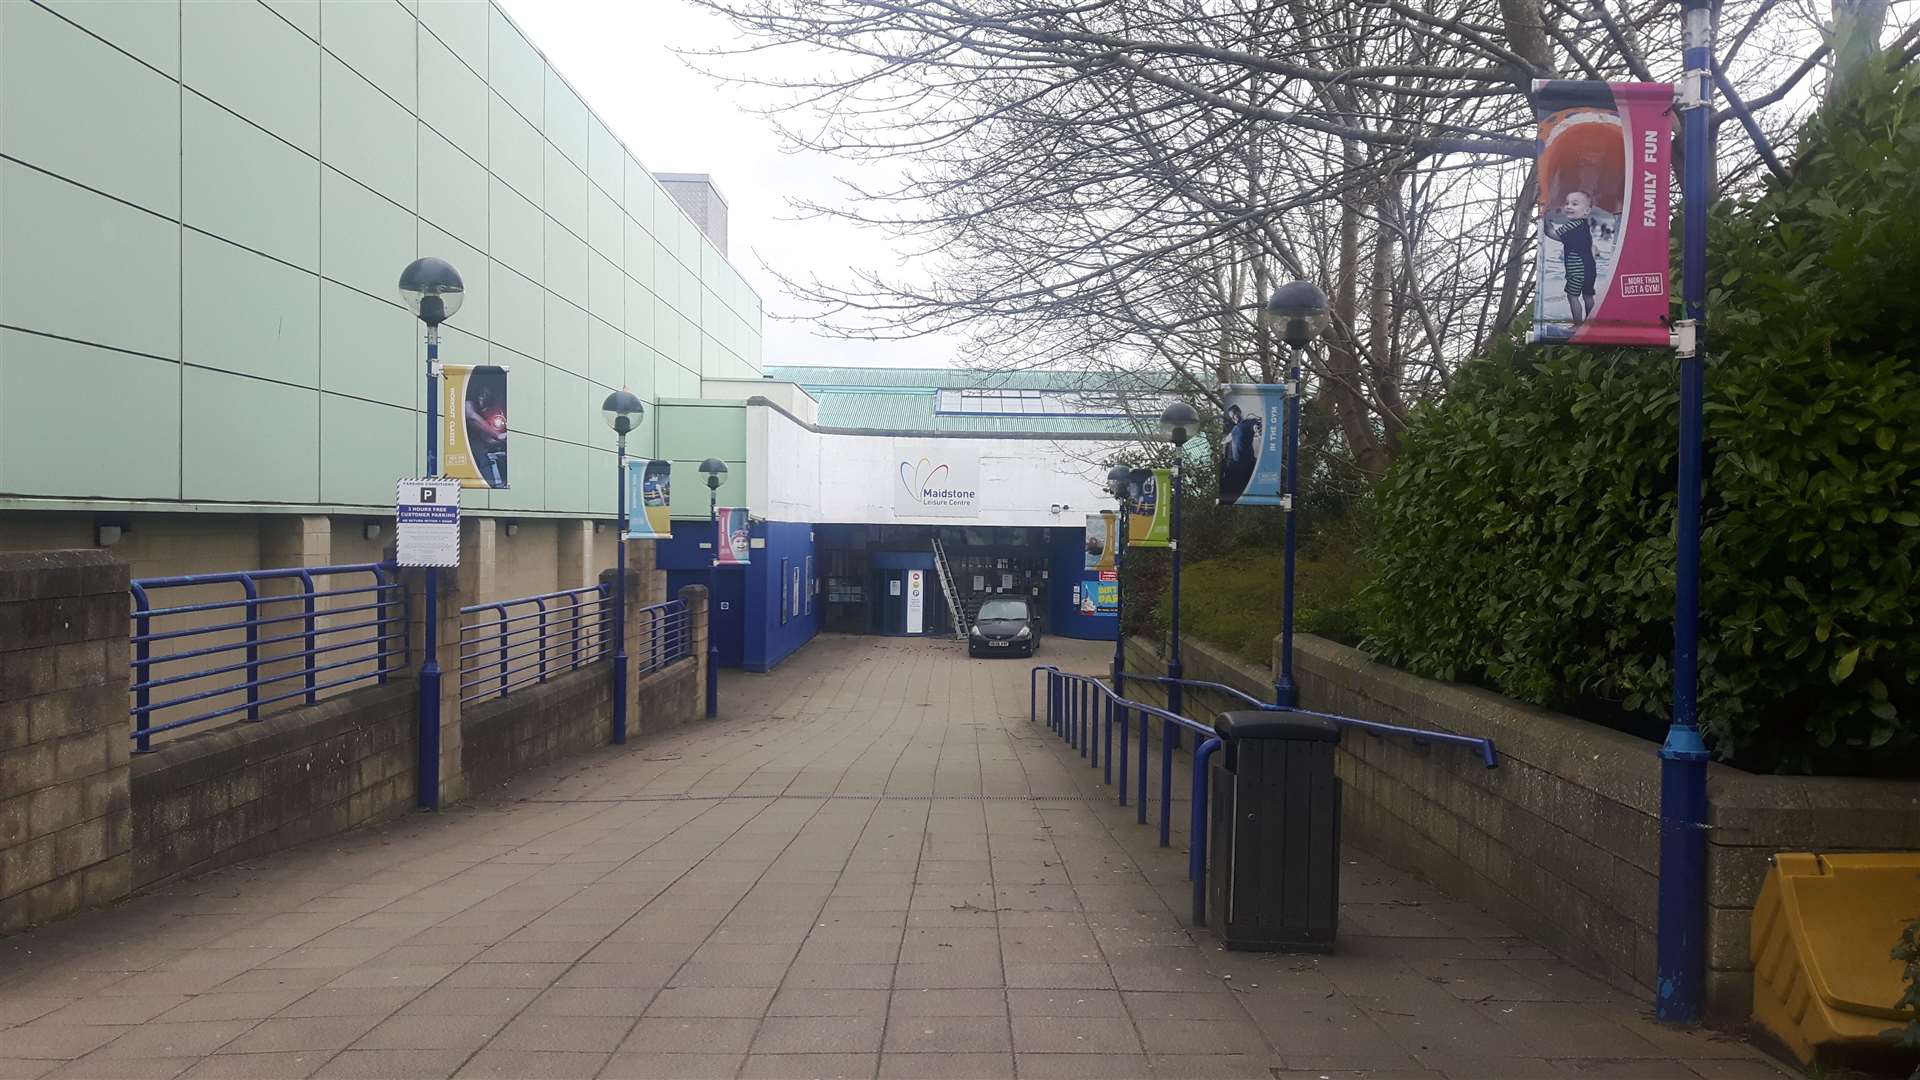 The leisure centre at Mote Park, Maidstone